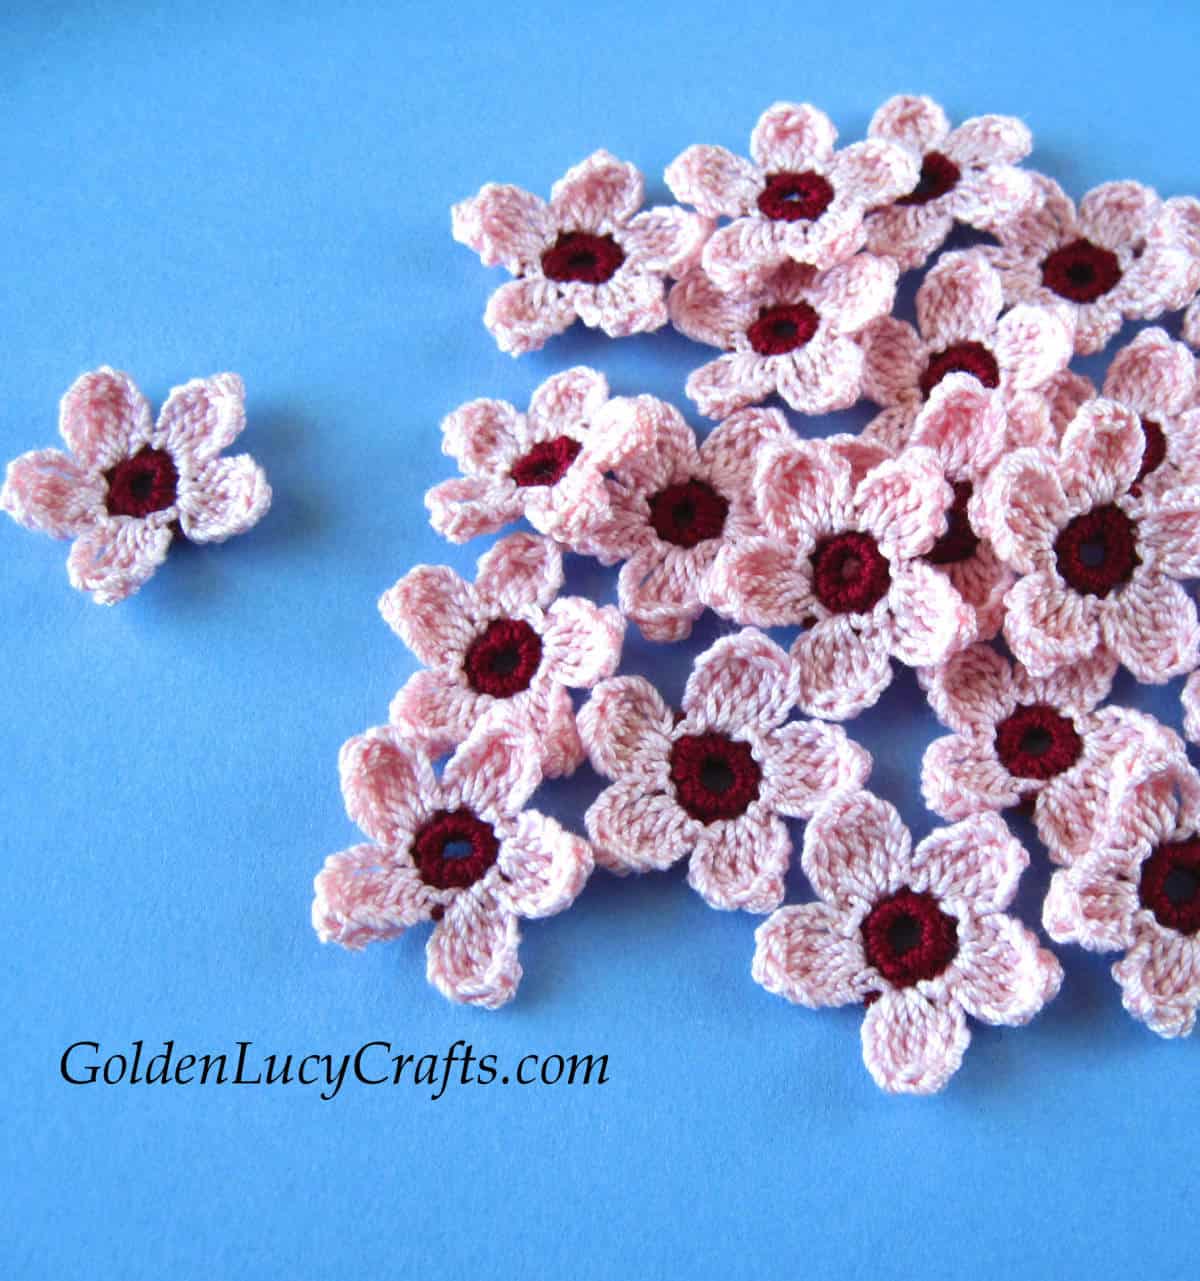 Crocheted pink cherry flowers on the blue background.